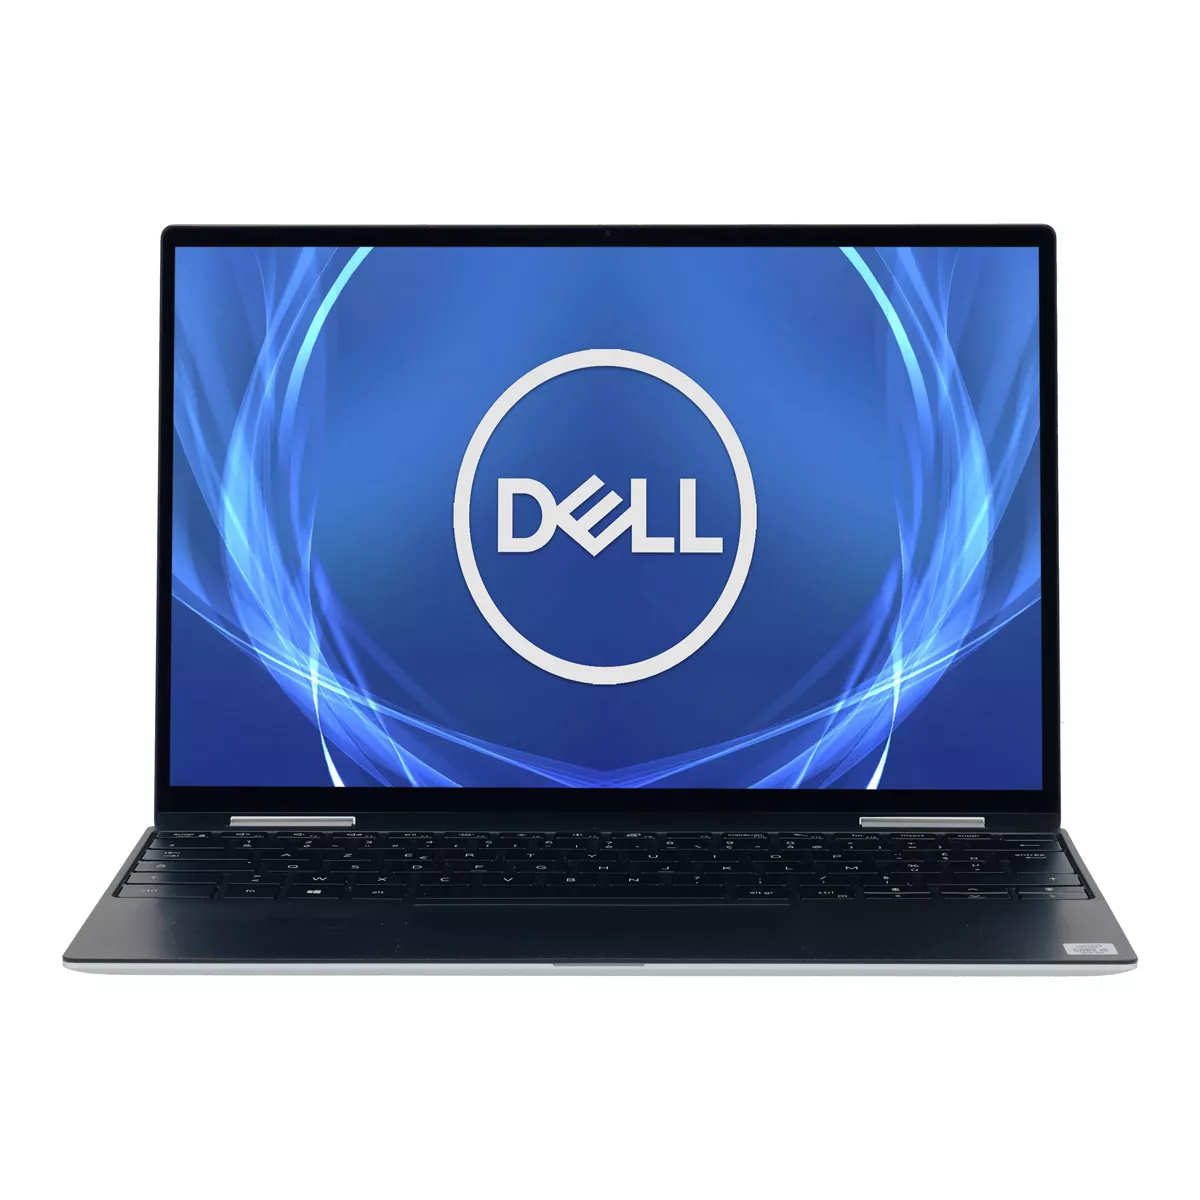 Dell XPS 13 - 7390 2-in1 Core i5 1035G1 240 GB M.2 nVME SSD Webcam A